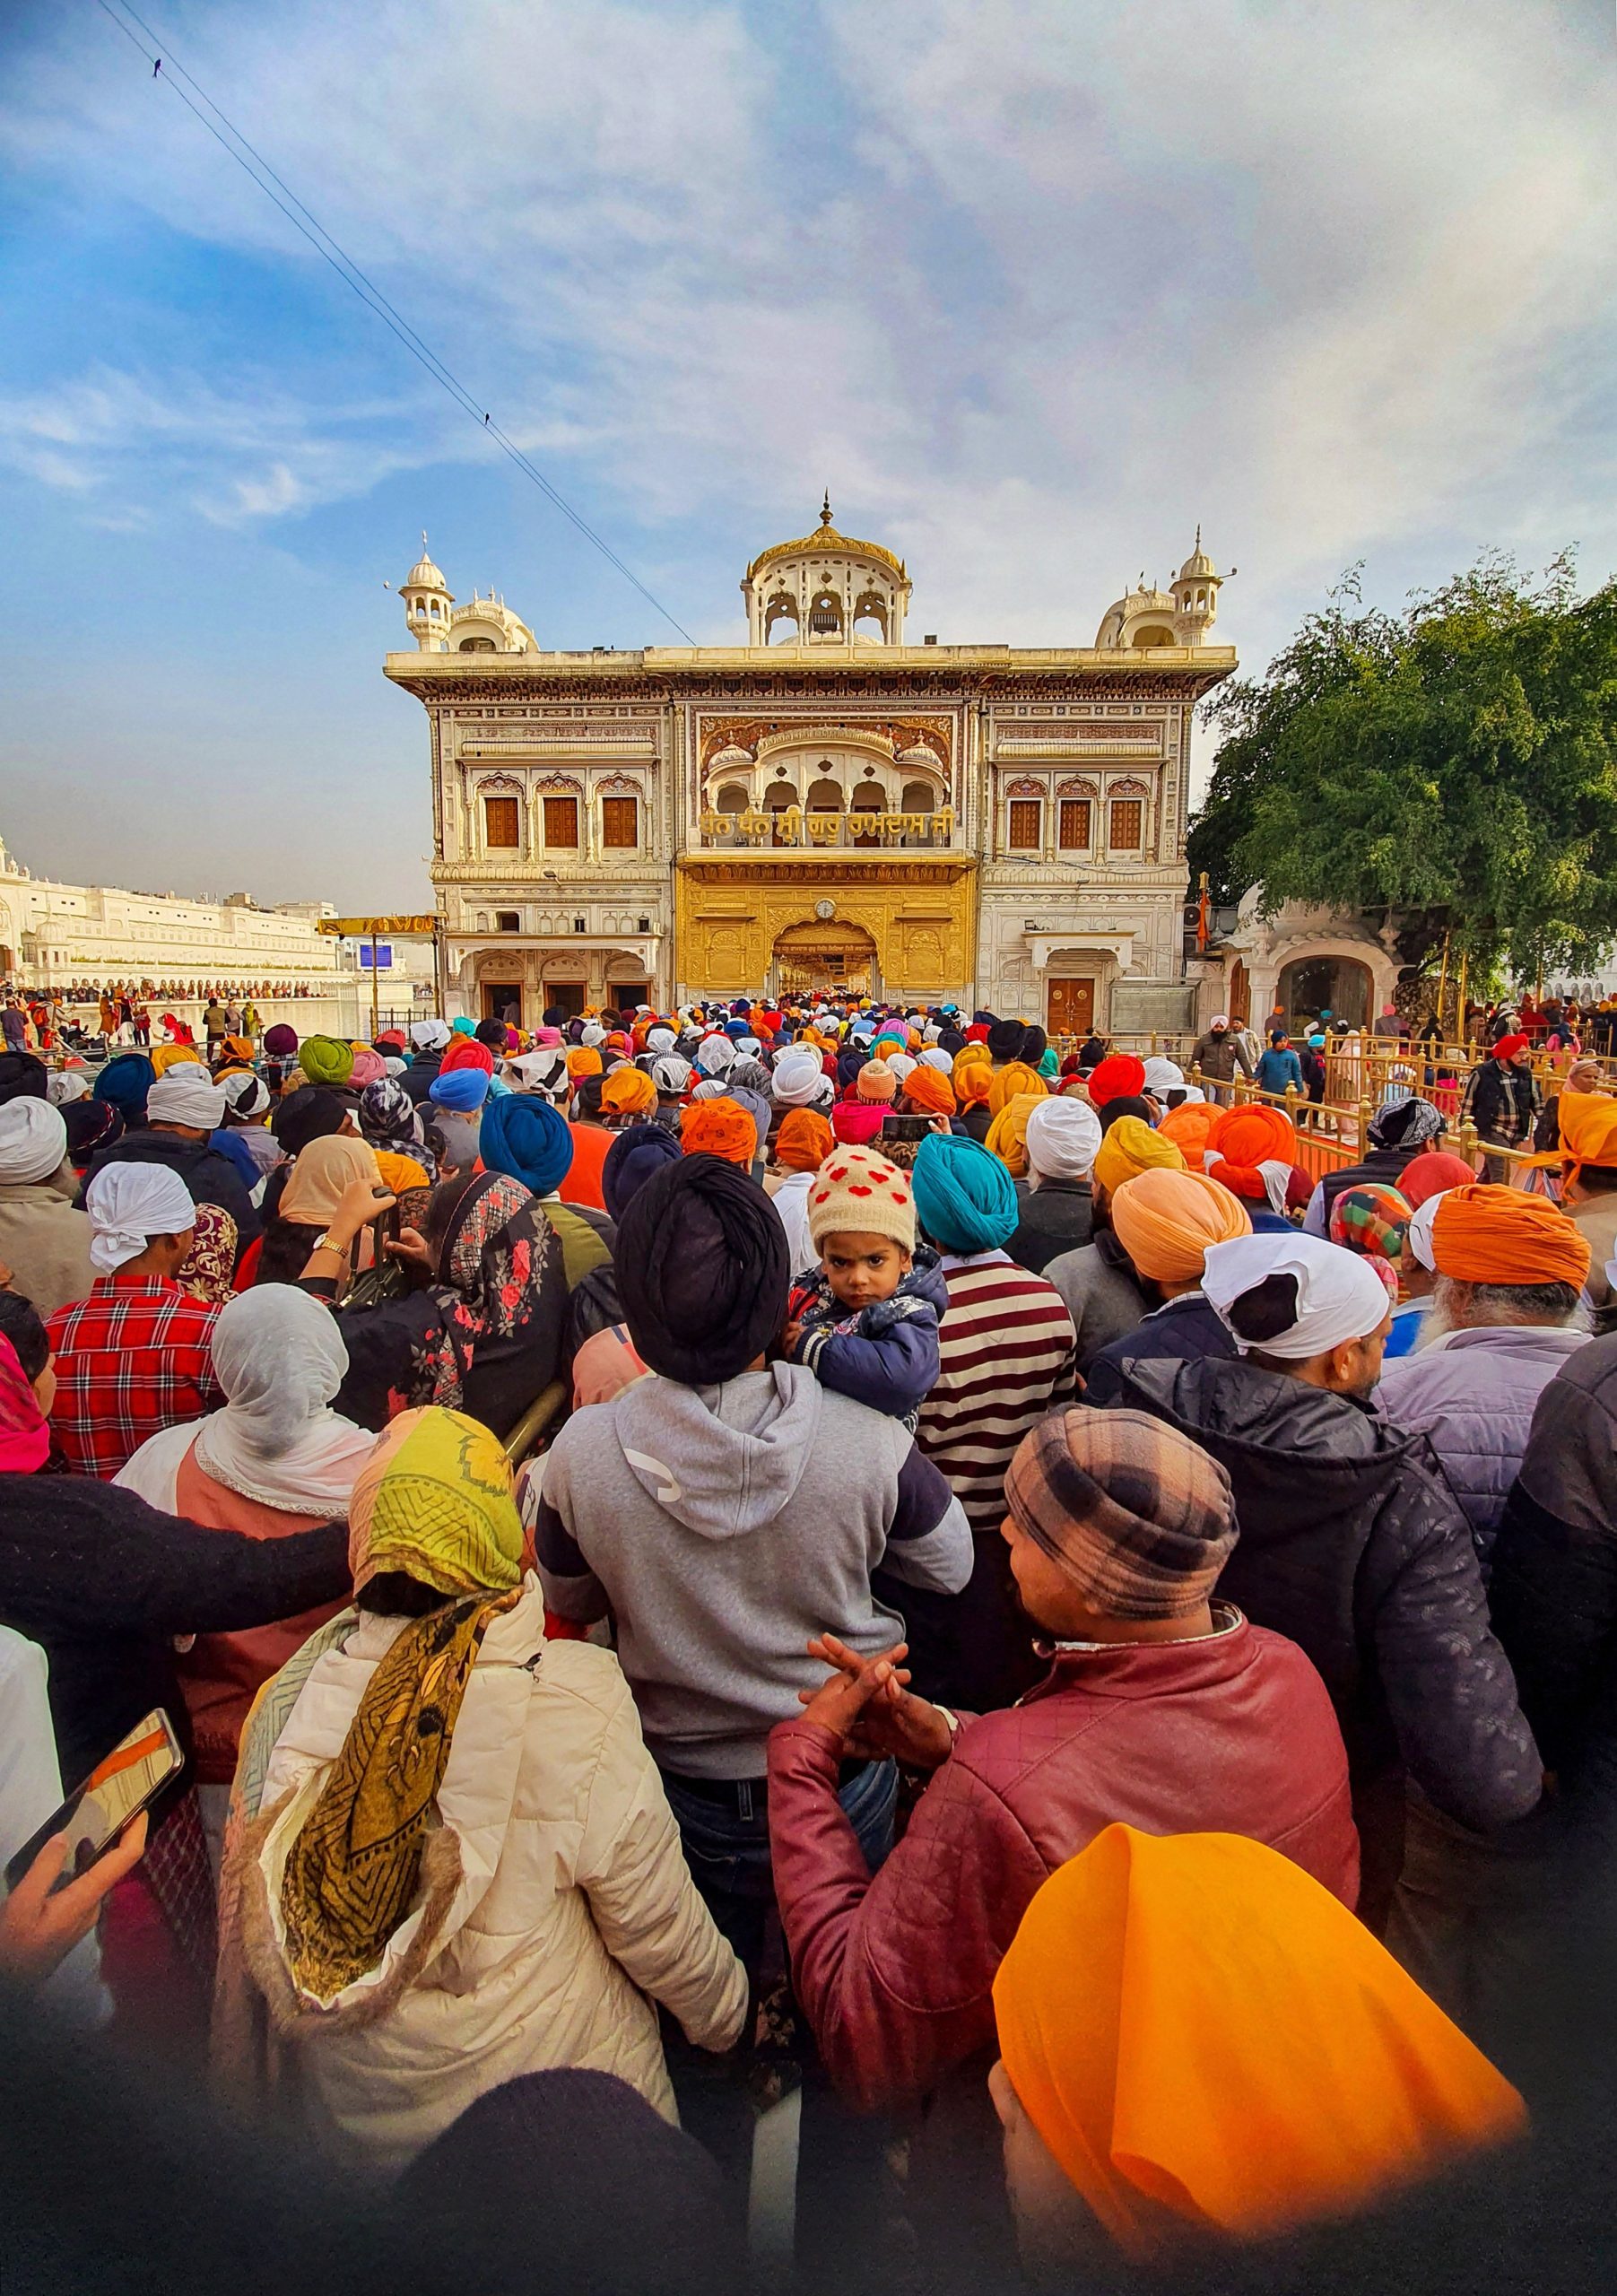 Special investigation team to look into Golden Temple sacrilege attempt